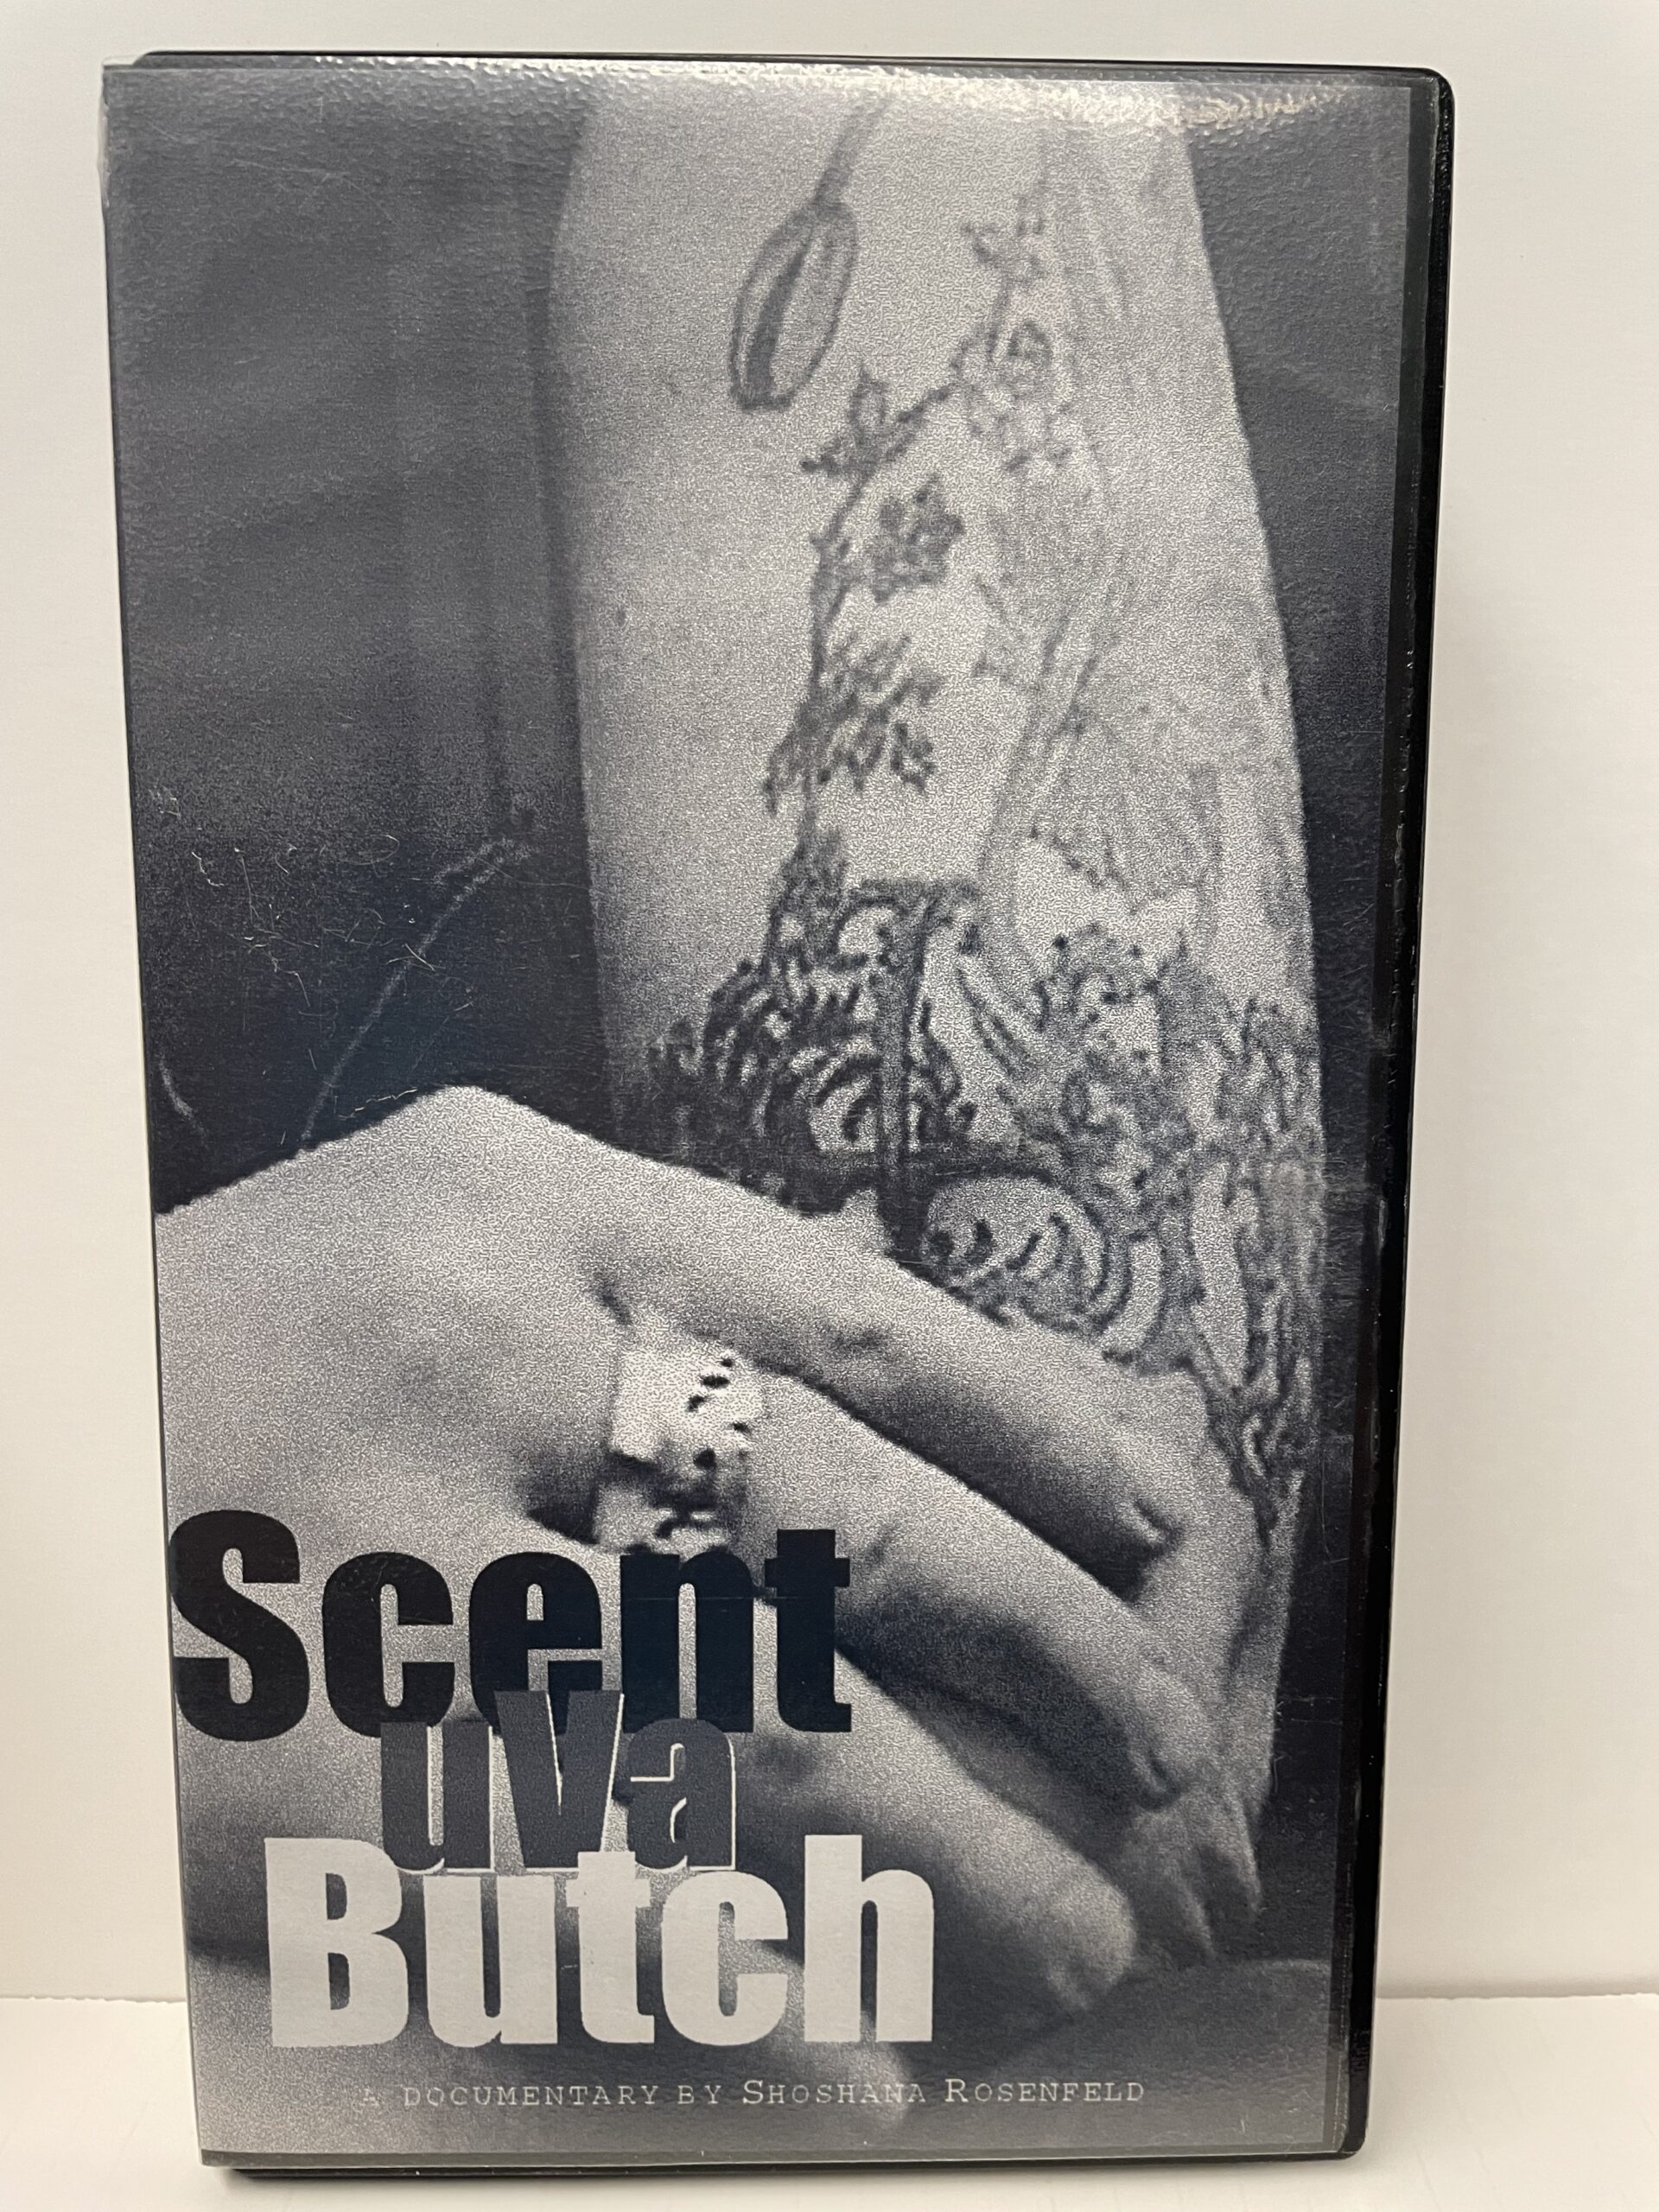 A physical VHS cover featuring a tattooed forearm that reads Scent uVa Butch, a documentary.